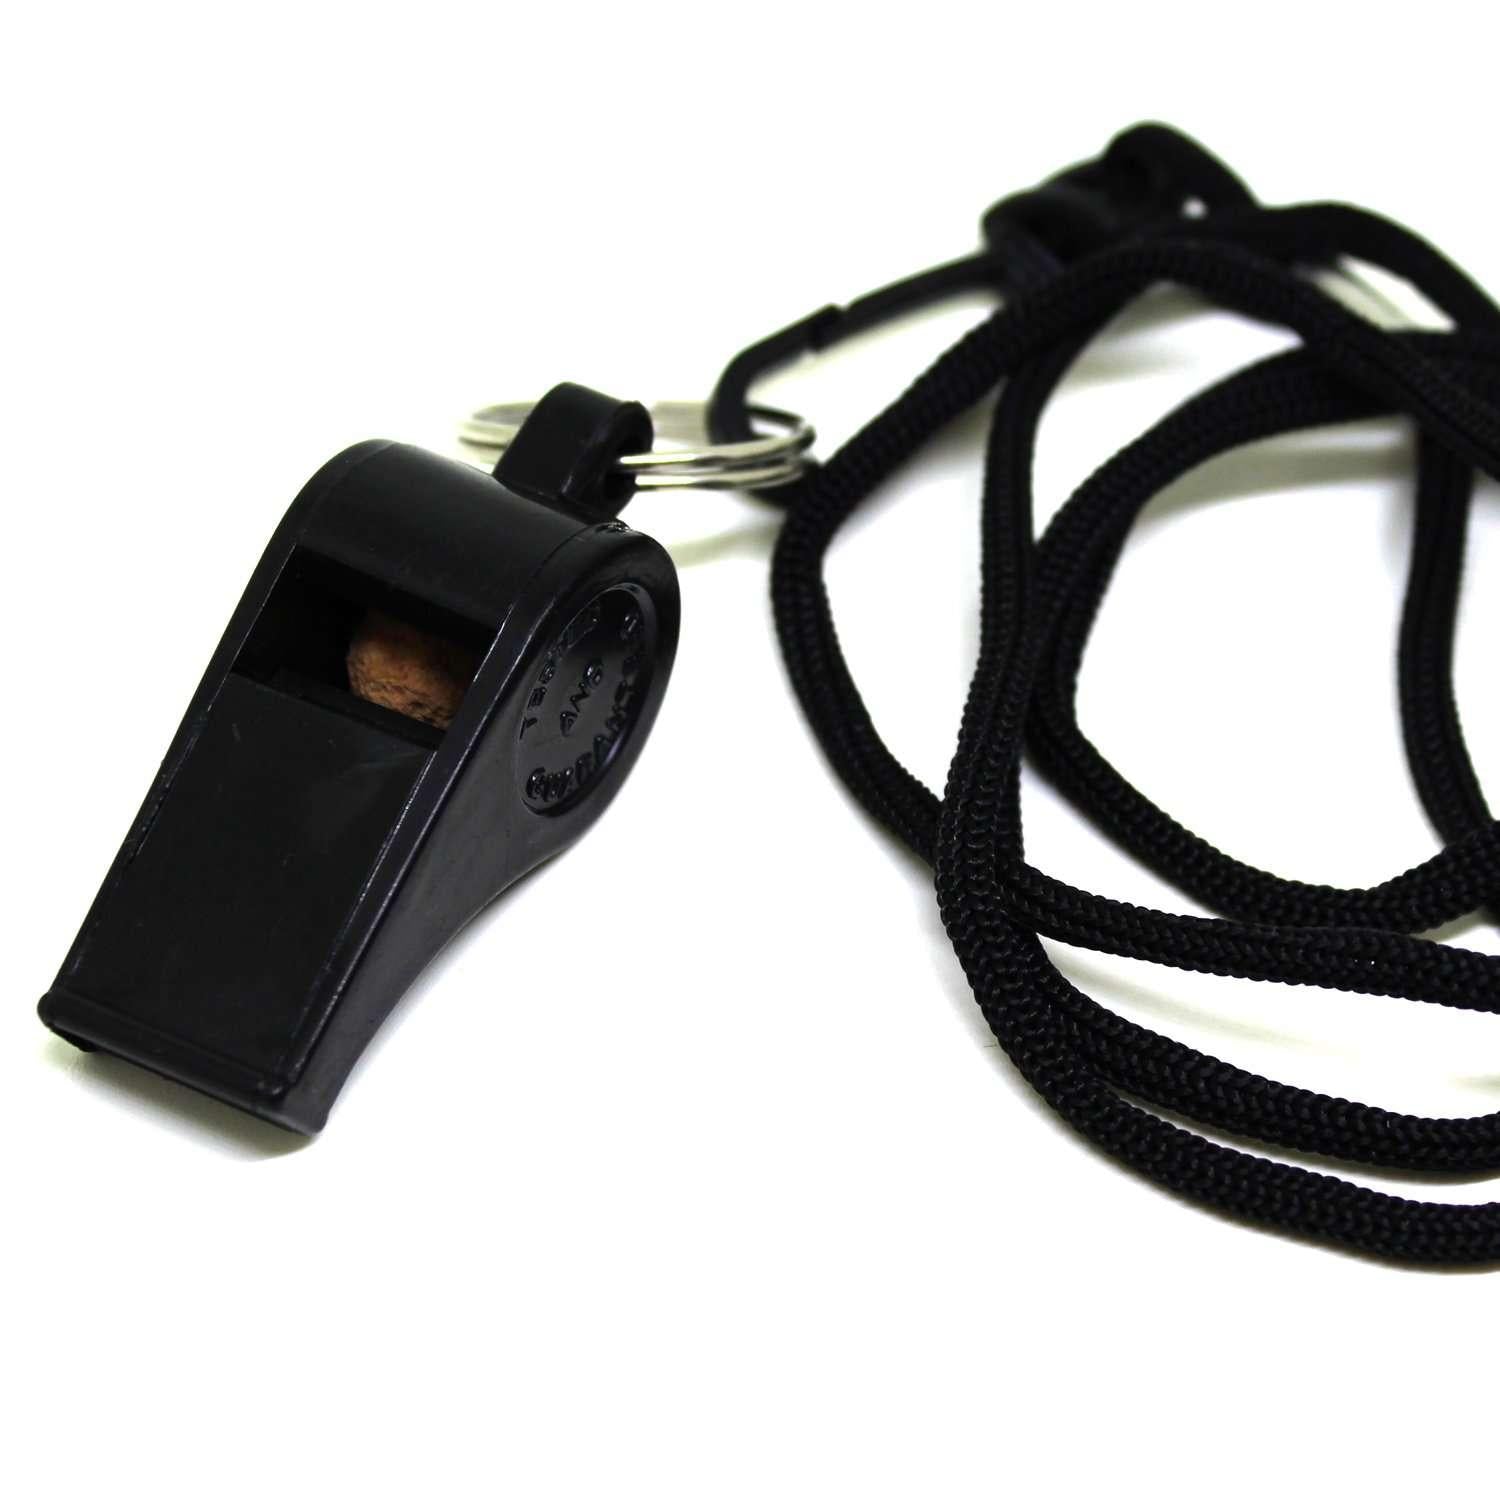 Referees whistle with lanyard - Fitness Health 